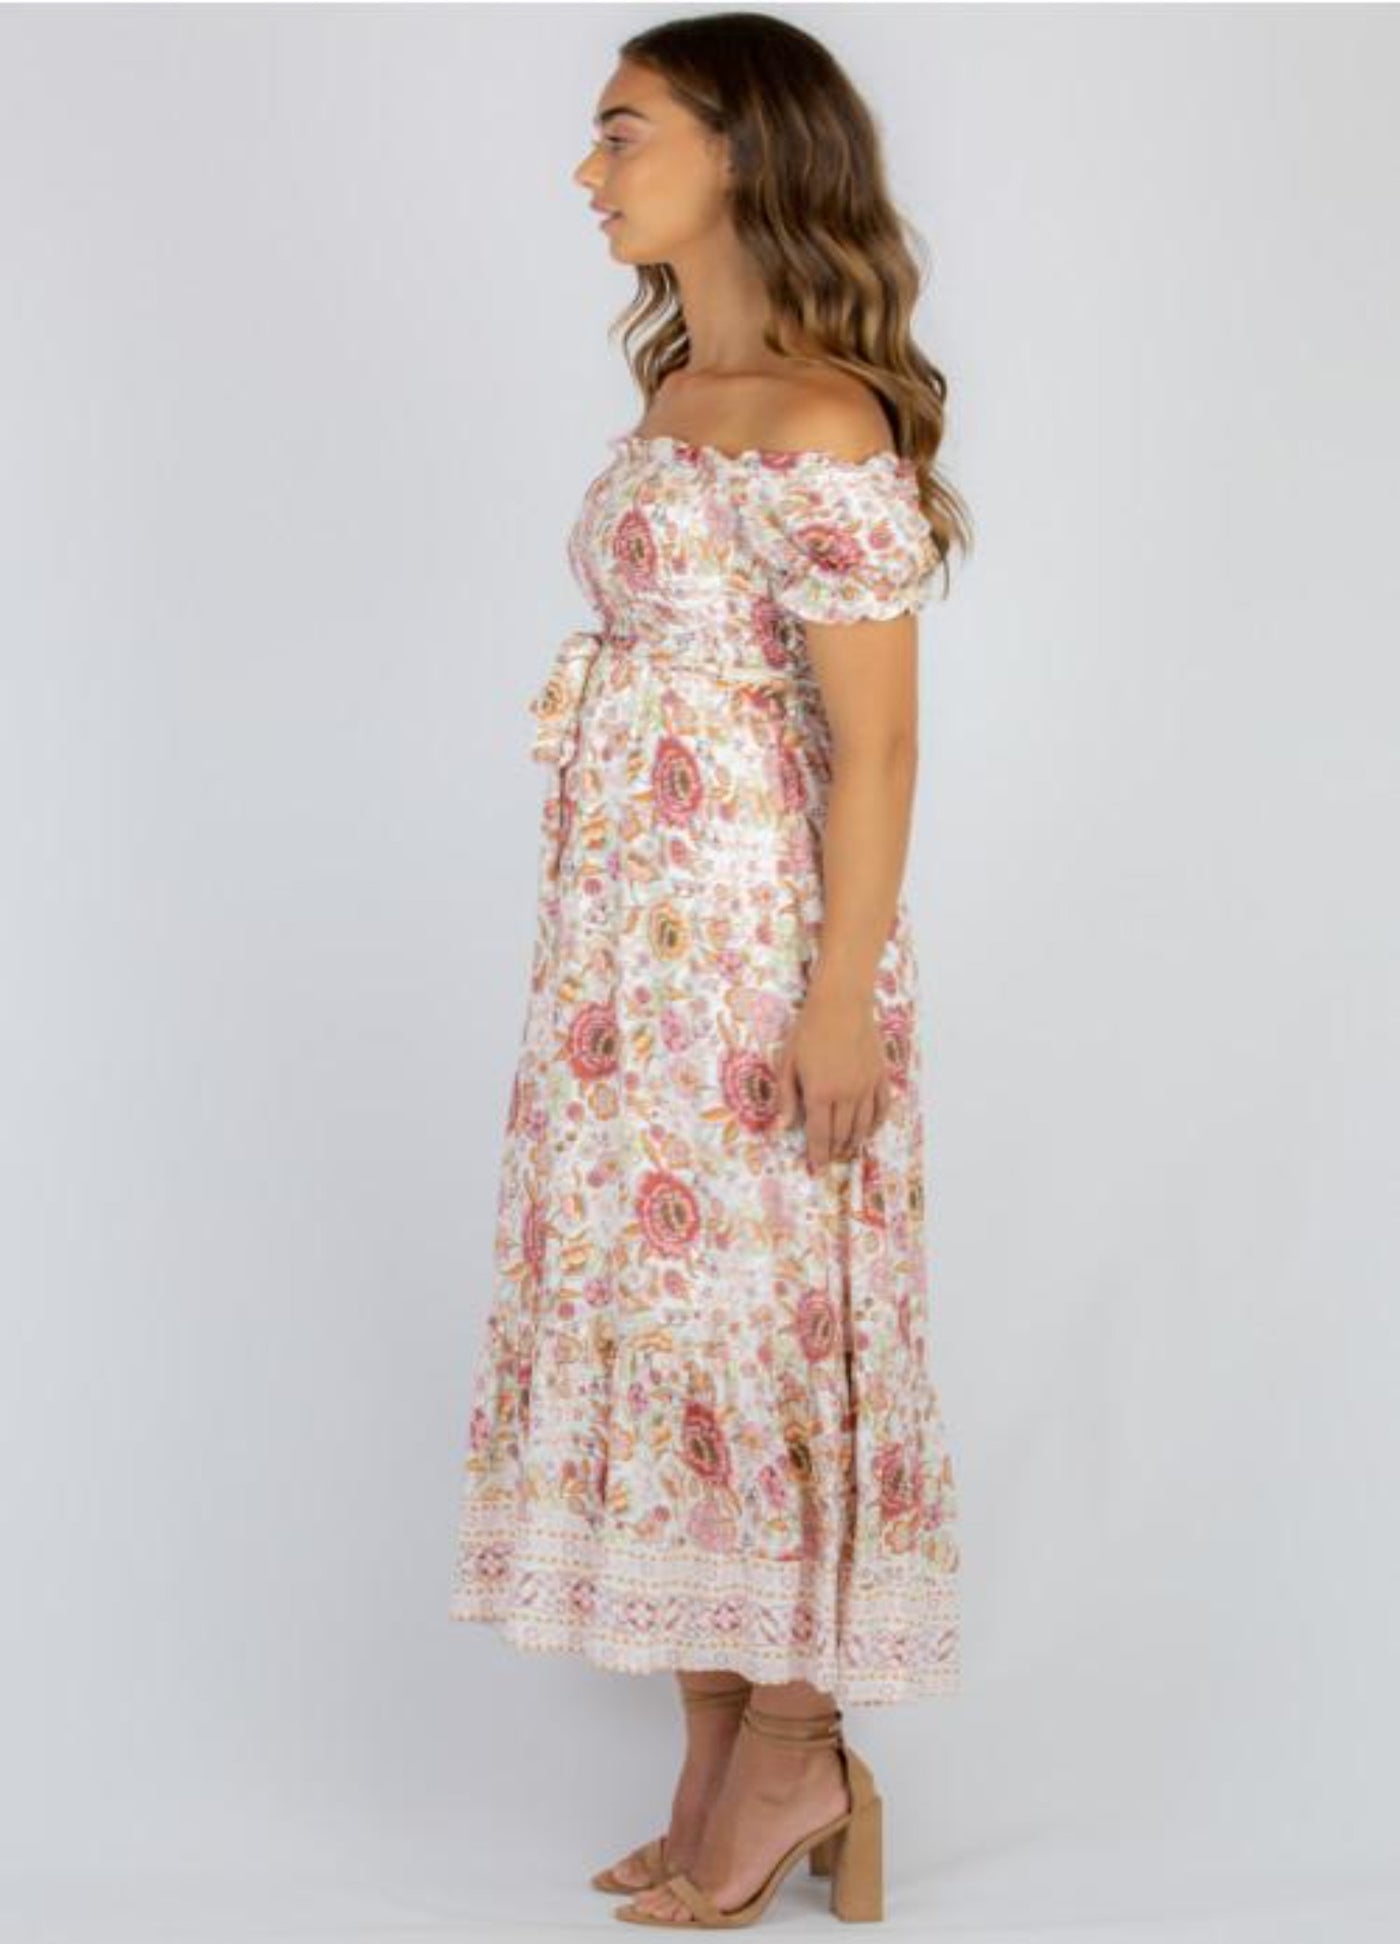 Model wearing floral maxi dress with nude colour heels from the size